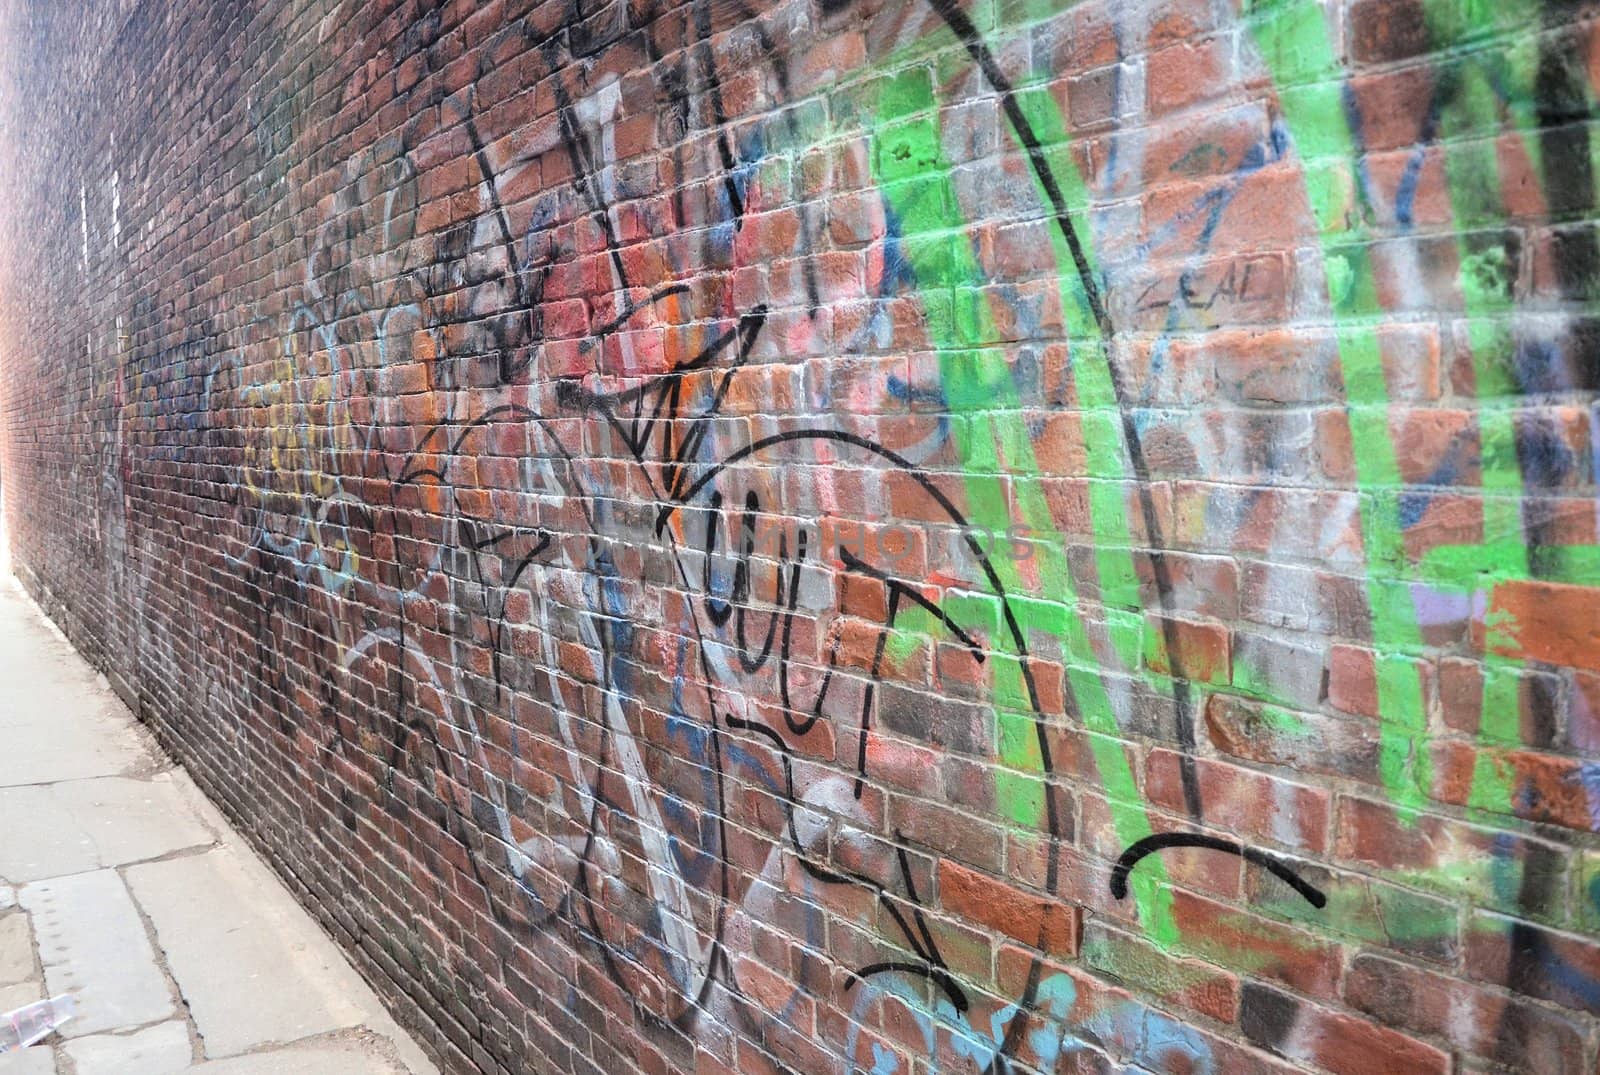 Graffiti on a wall in a northern city